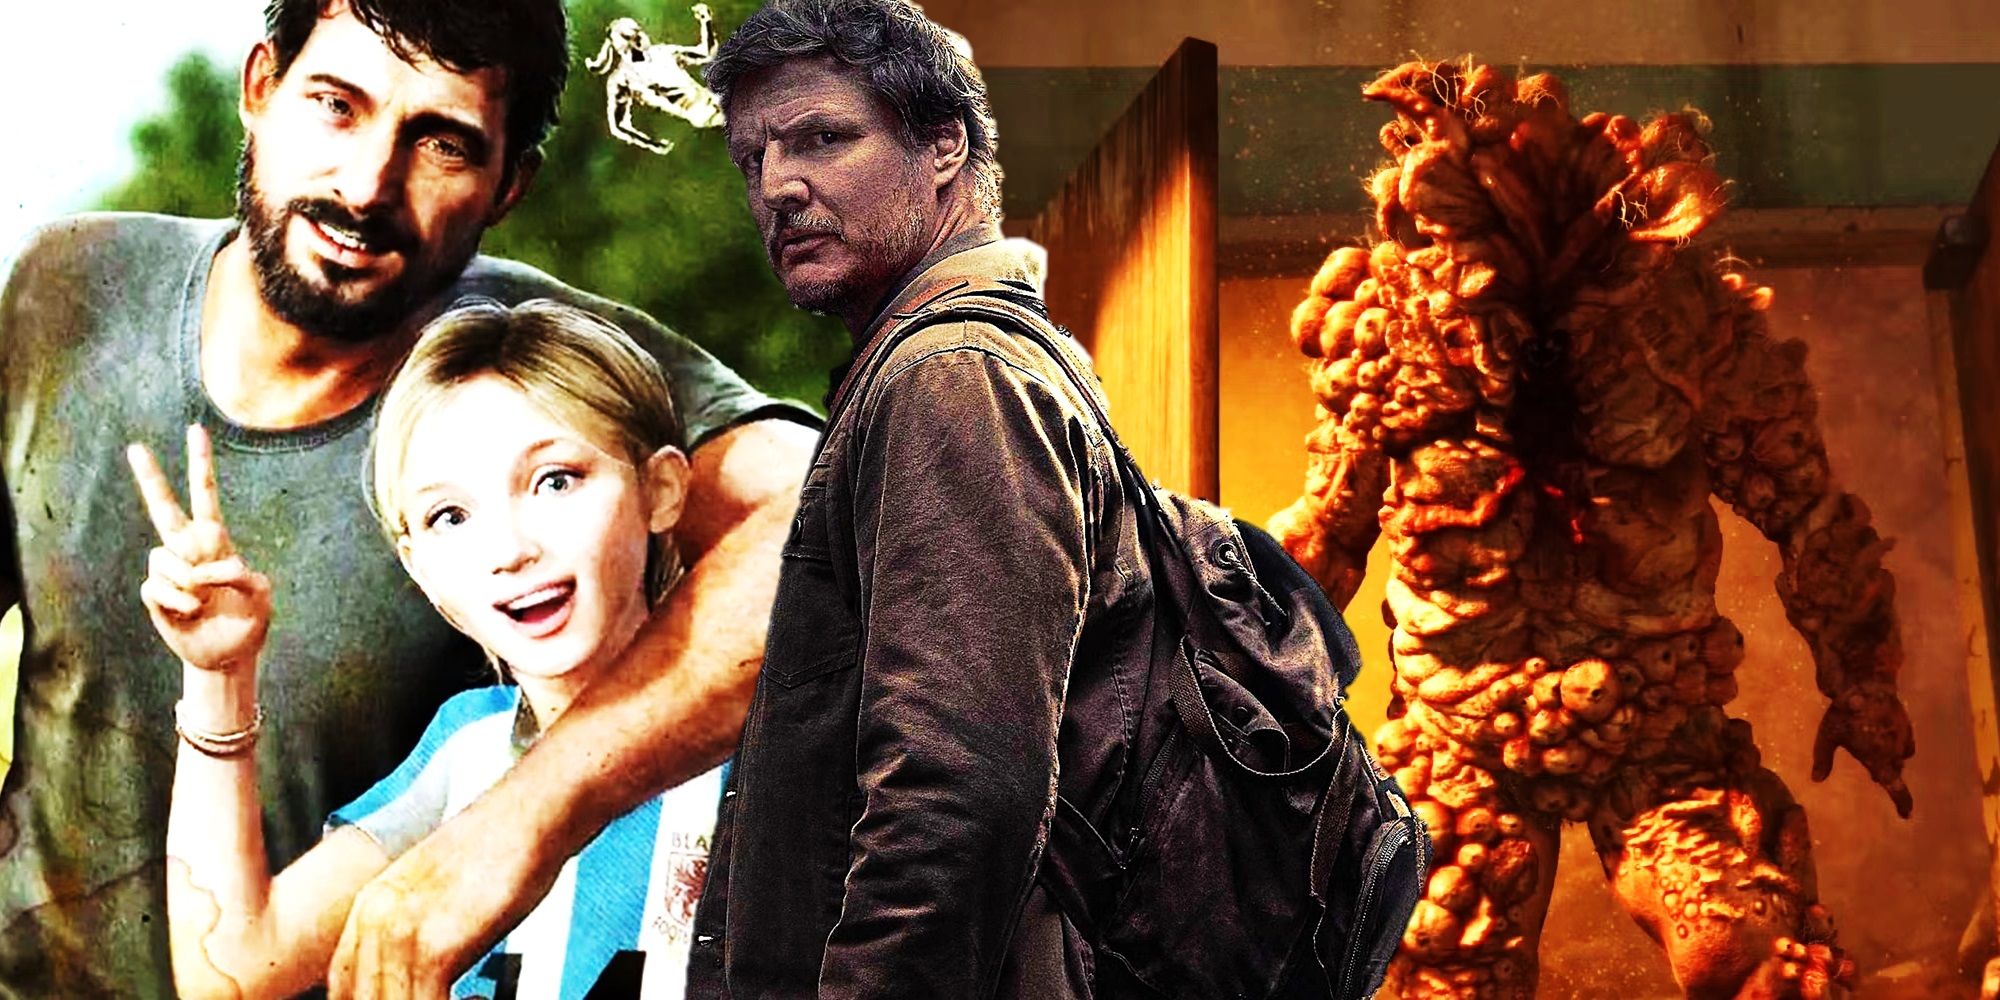 Collage of Joel and Sarah in The Last of Us game, Pedro Pascal in the TV show, and a bloater in the game